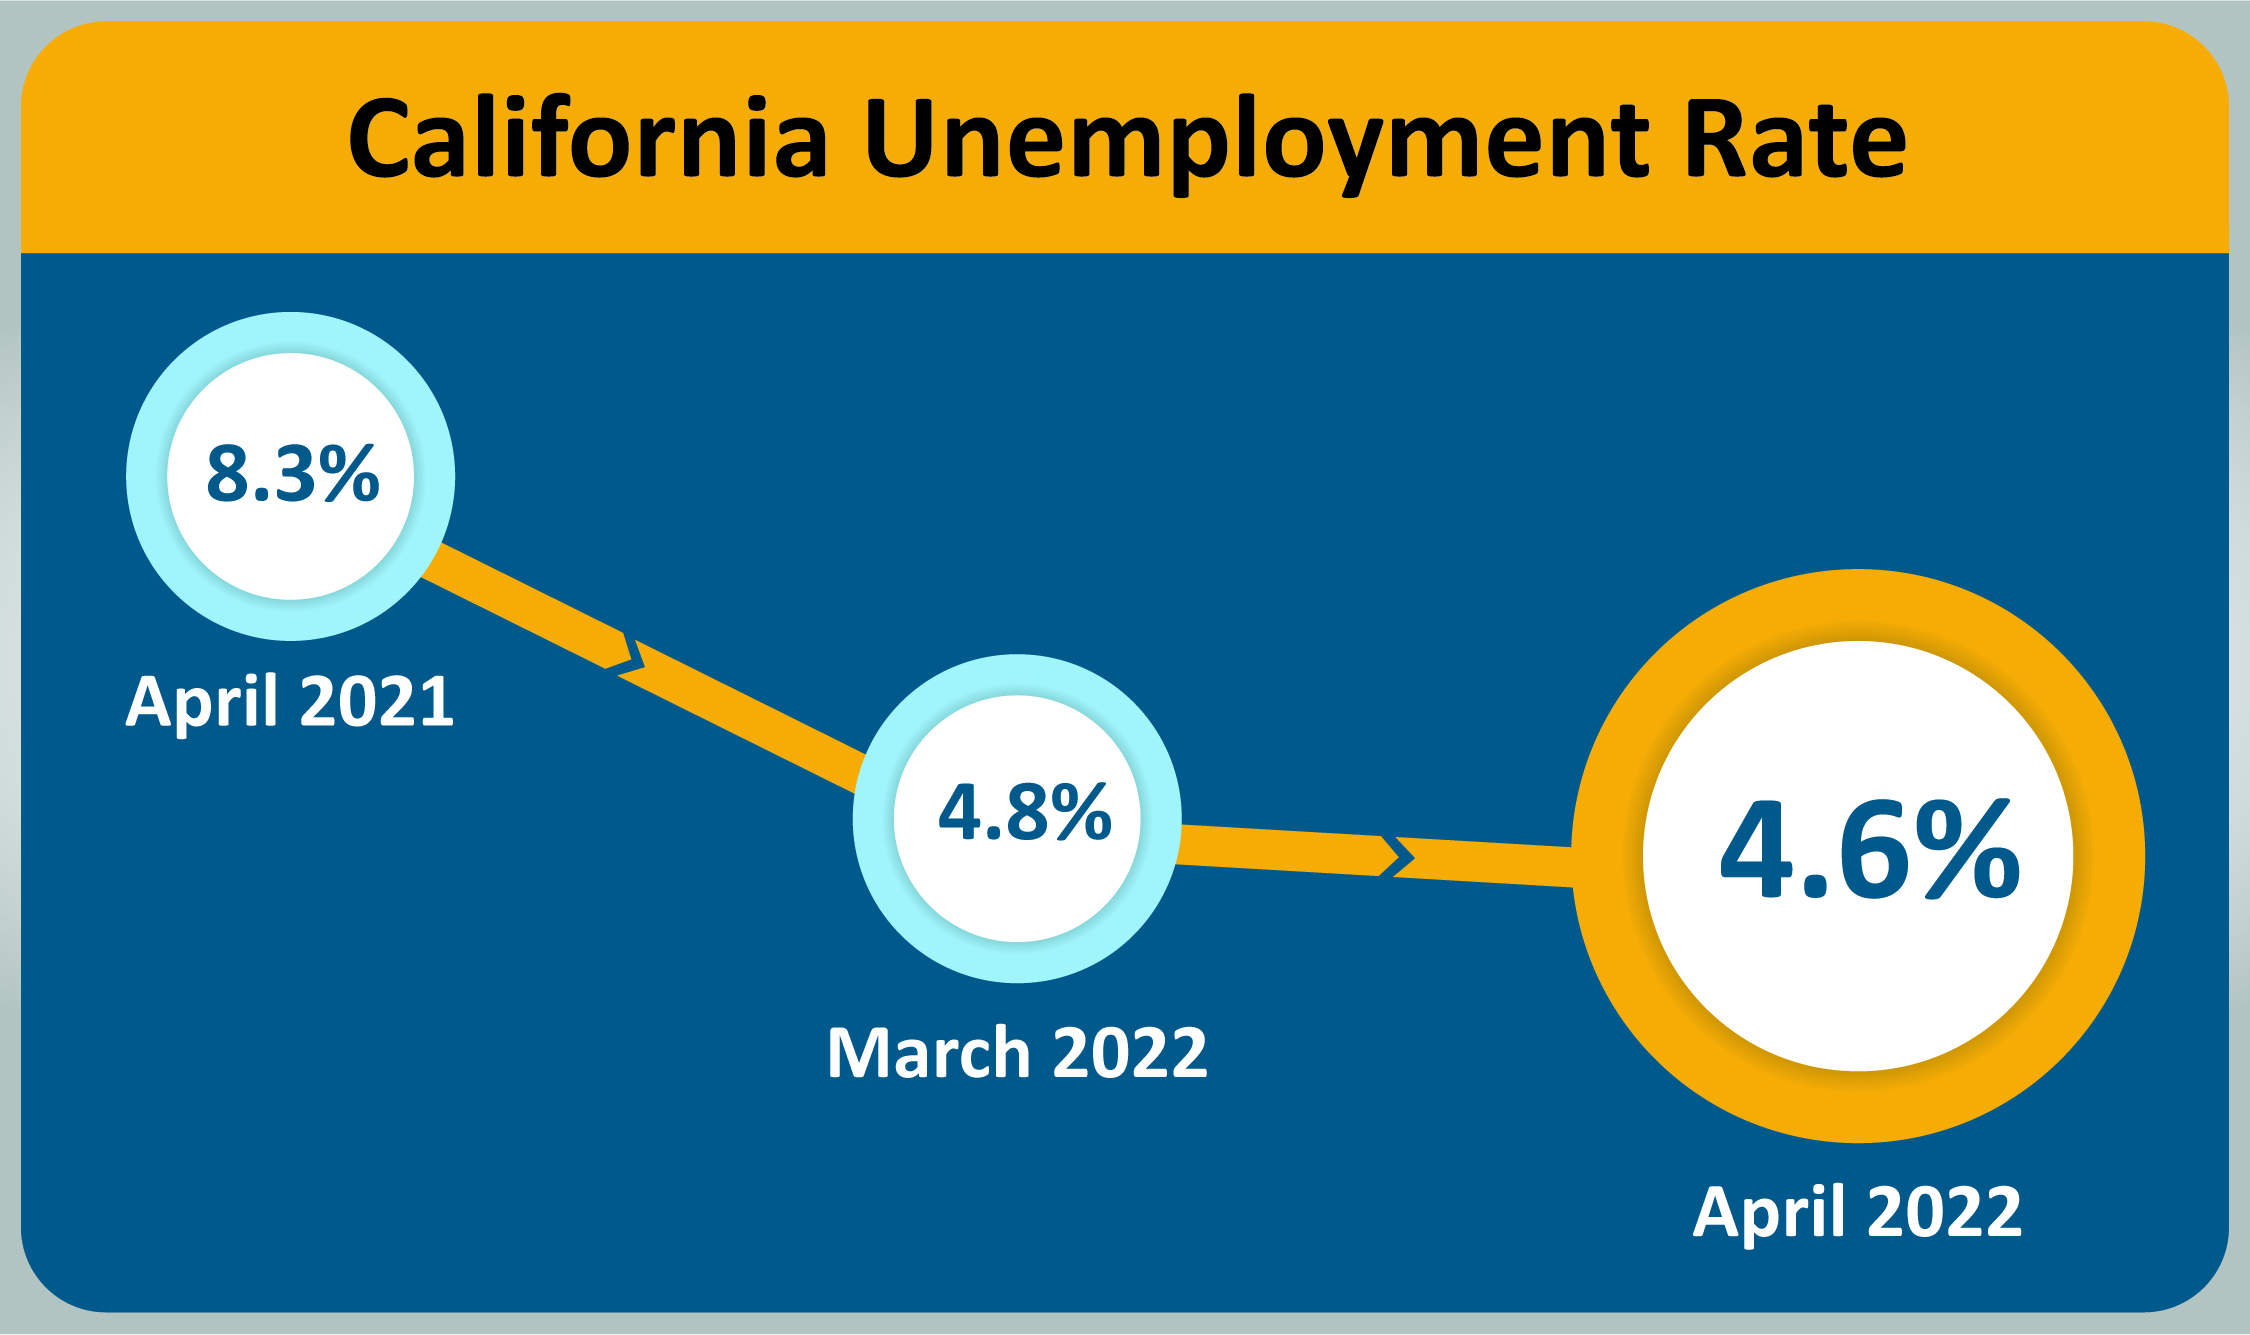 The California unemployment rate has dropped to 4.6 percent from 8.3 percent in April 2021